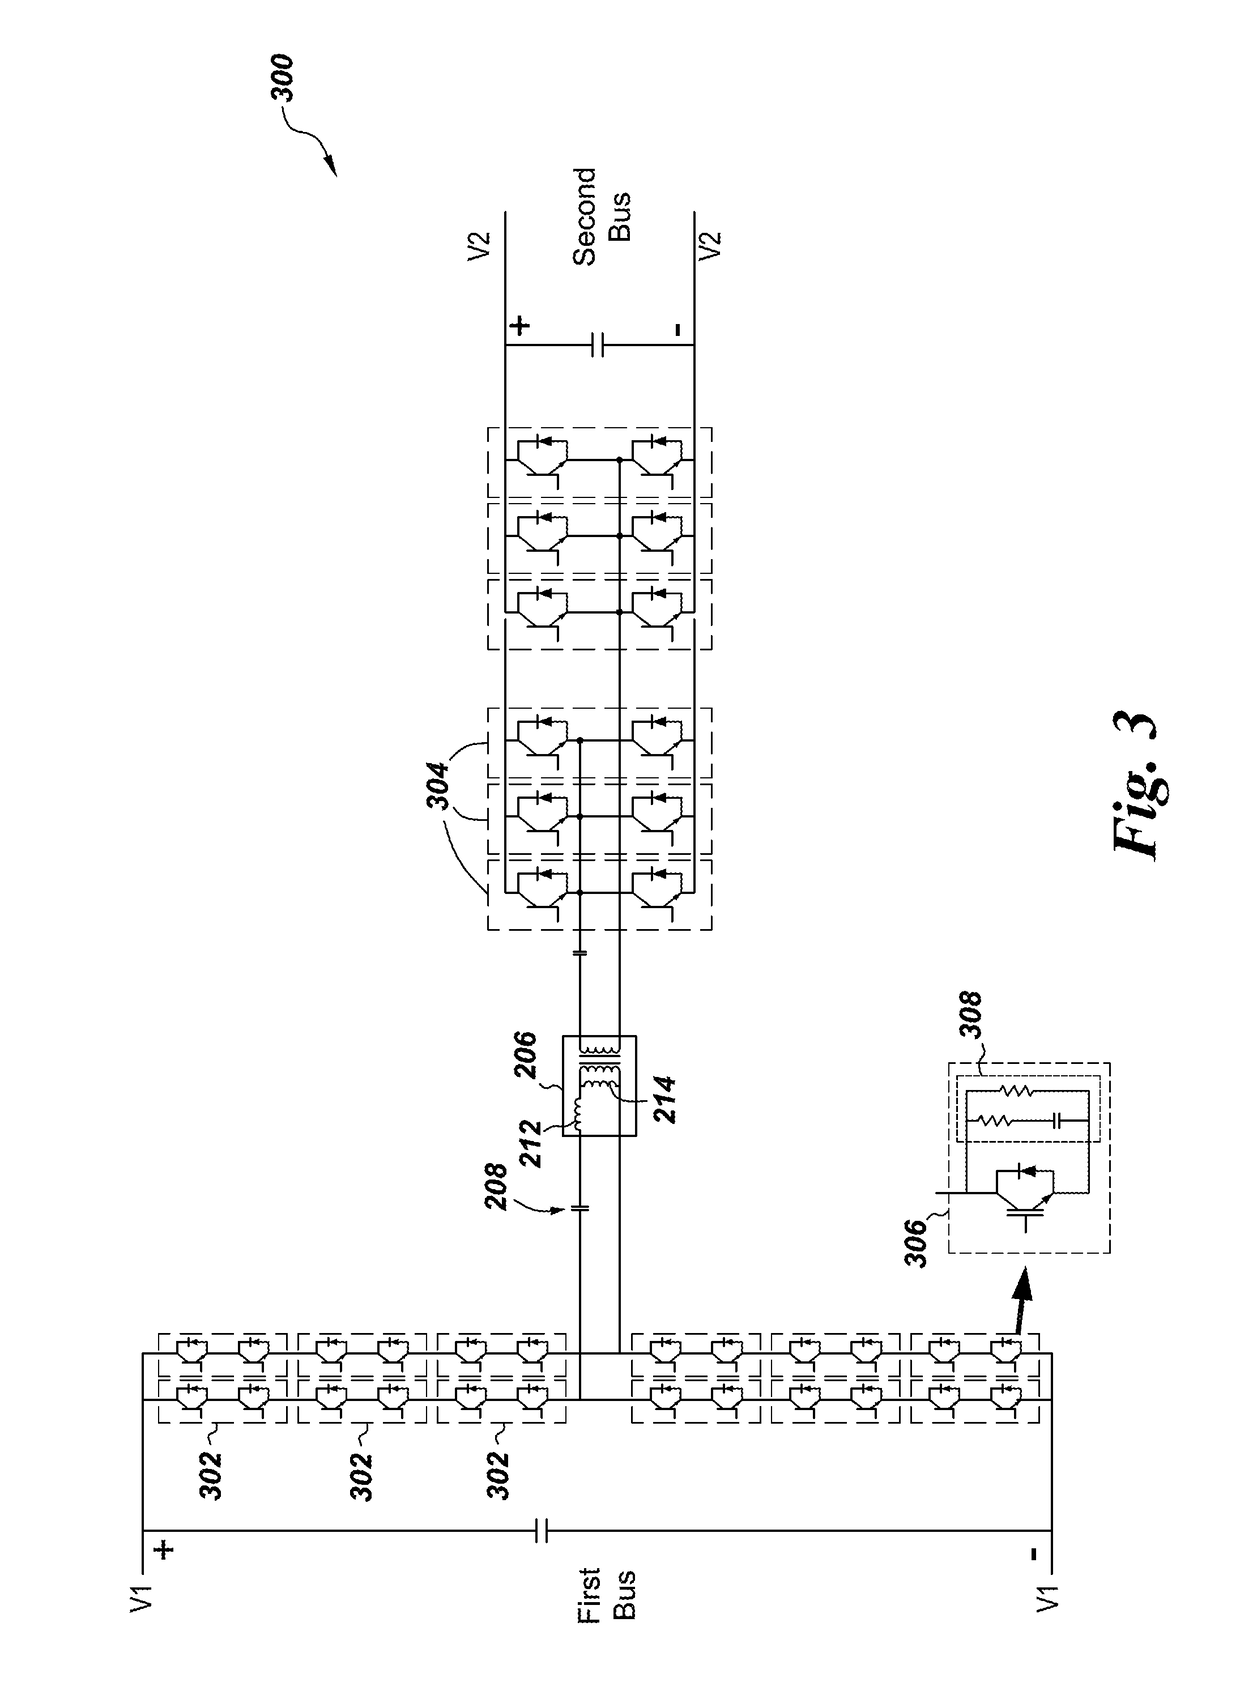 System and method for operating a DC to DC power converter